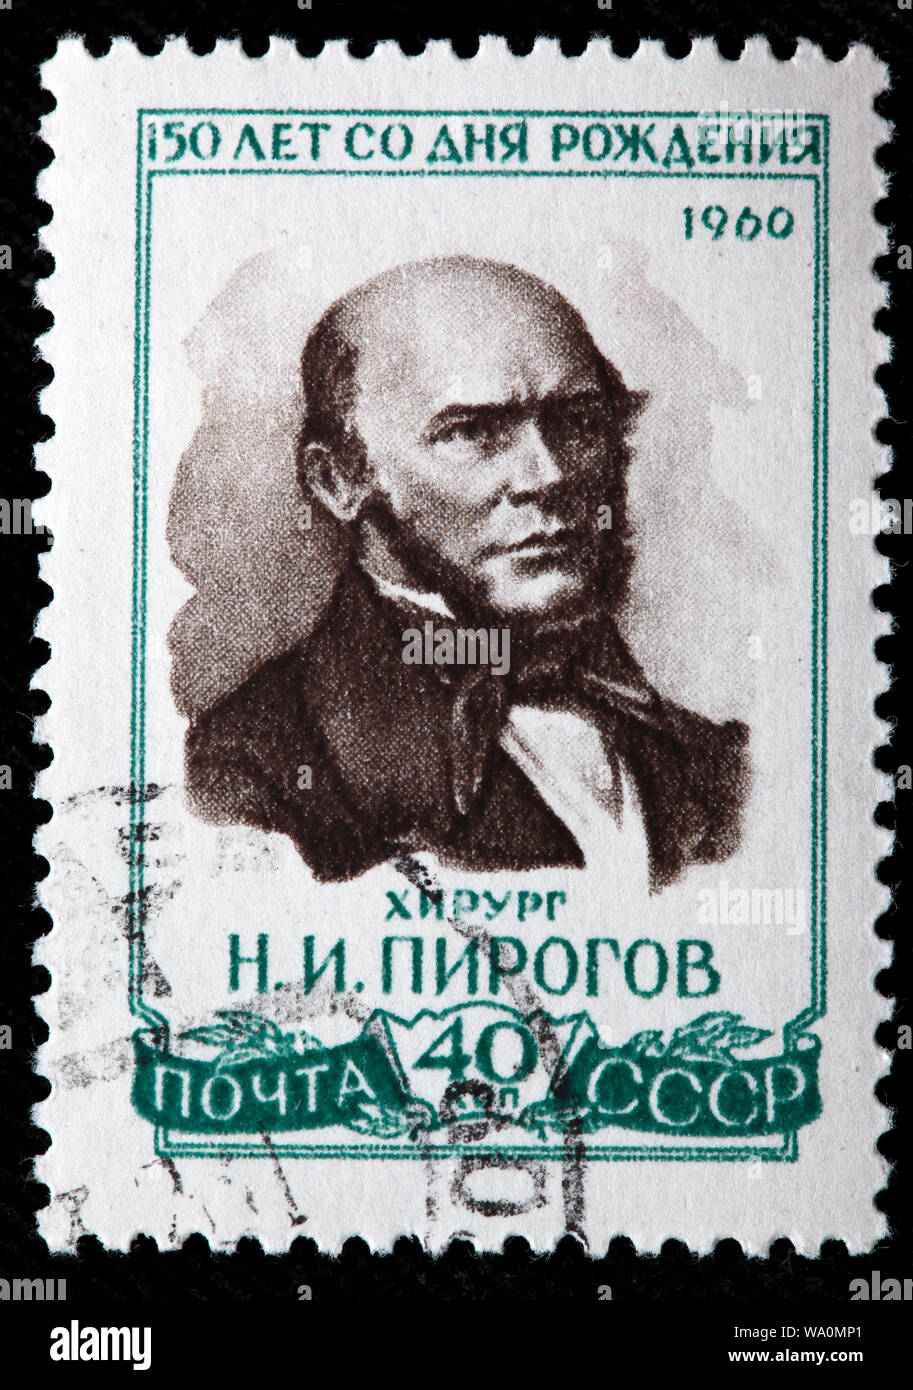 Nikolay Pirogov (1810-1881), Russian doctor and scientist, postage stamp, Russia, USSR, 1960 Stock Photo